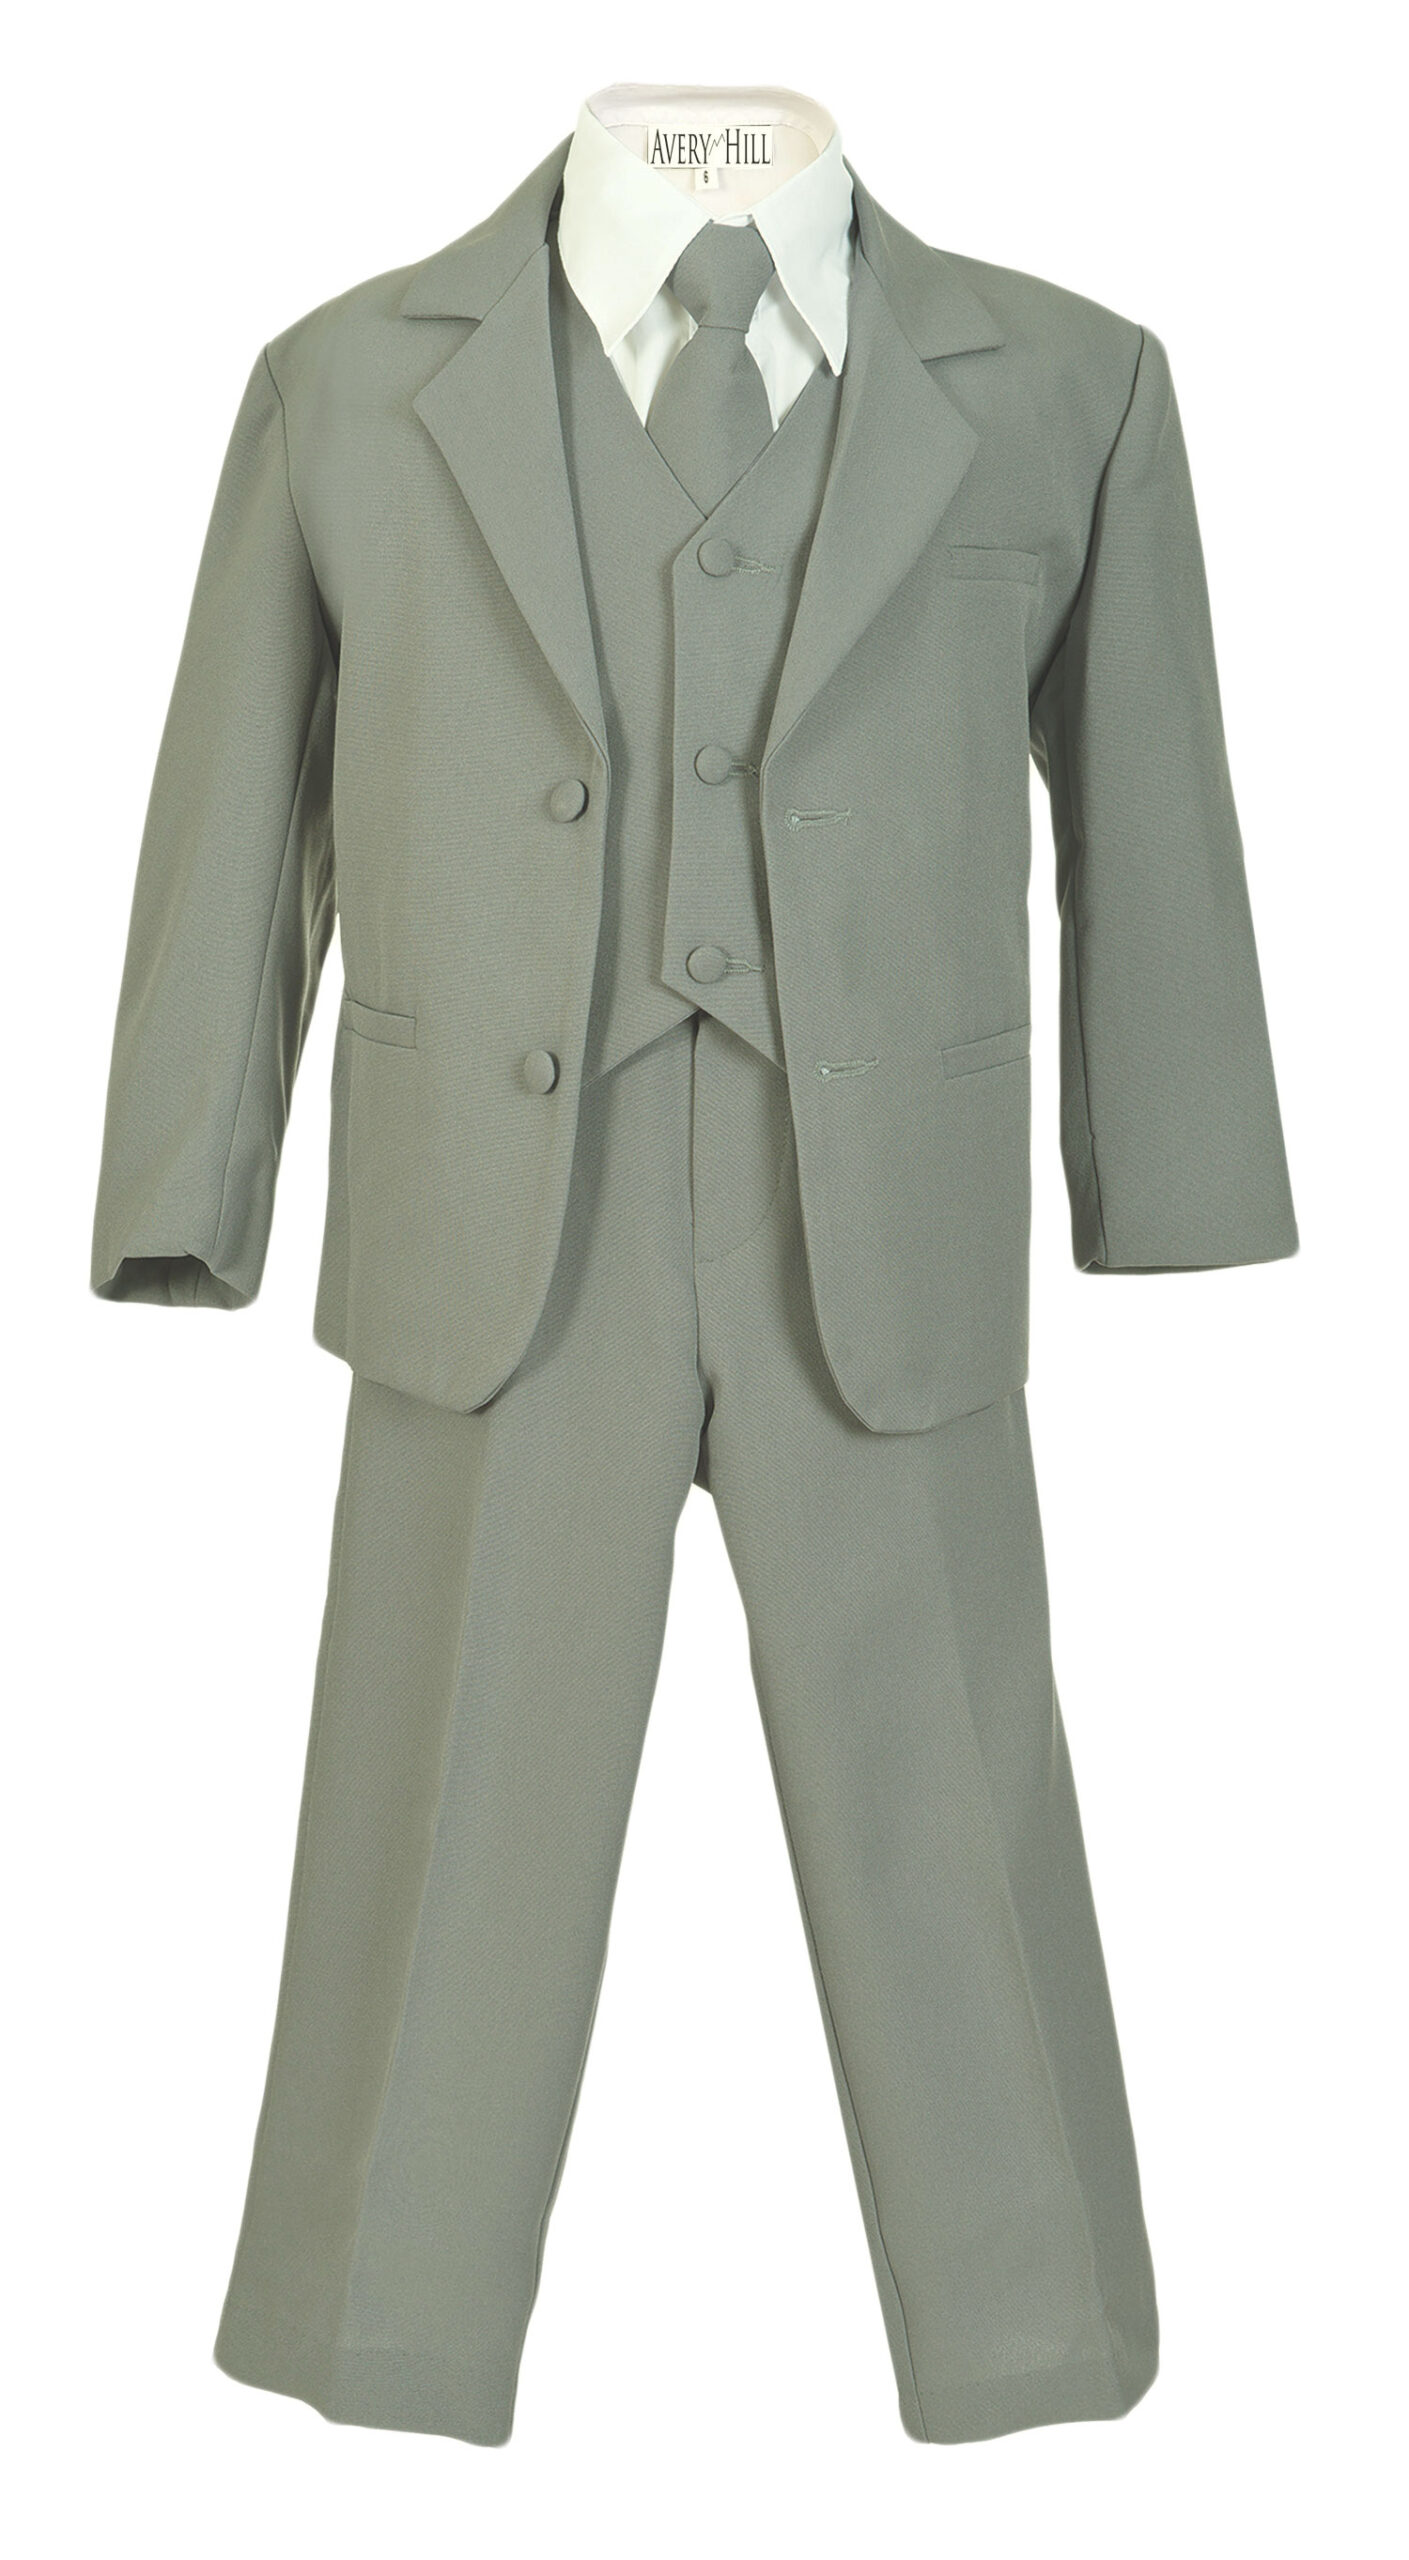 Avery Hill Boys Formal 5 Piece Suit with Shirt and Vest Silver White - L